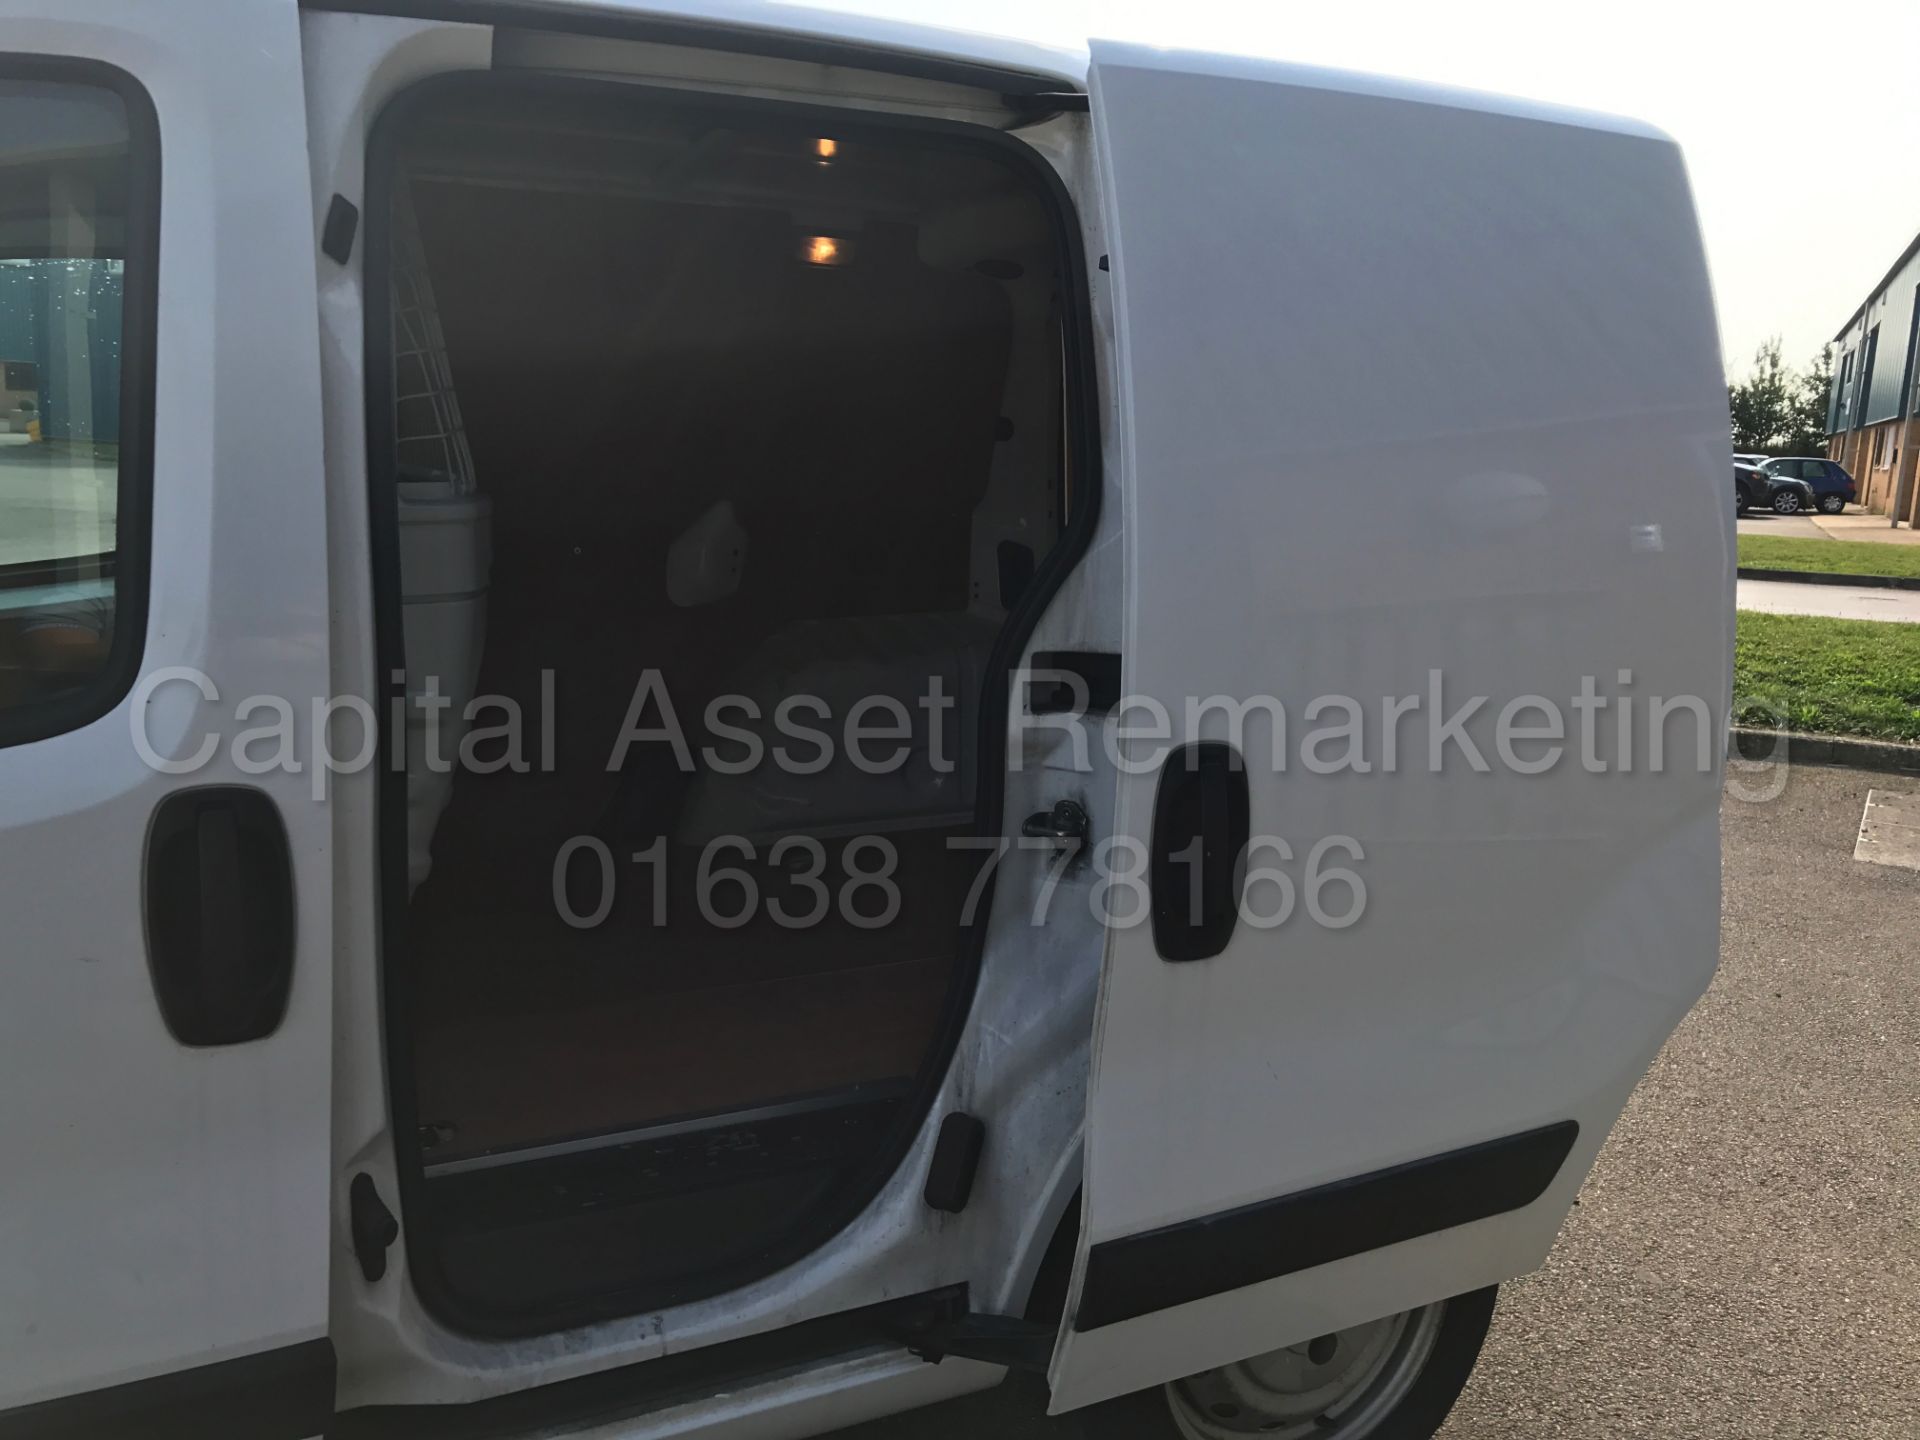 (On Sale) PEUGEOT BIPPER 'S' HDI (2014 MODEL) 'HDI - DIESEL - 5 SPEED' (1 COMPANY OWNER FROM NEW) - Image 14 of 23